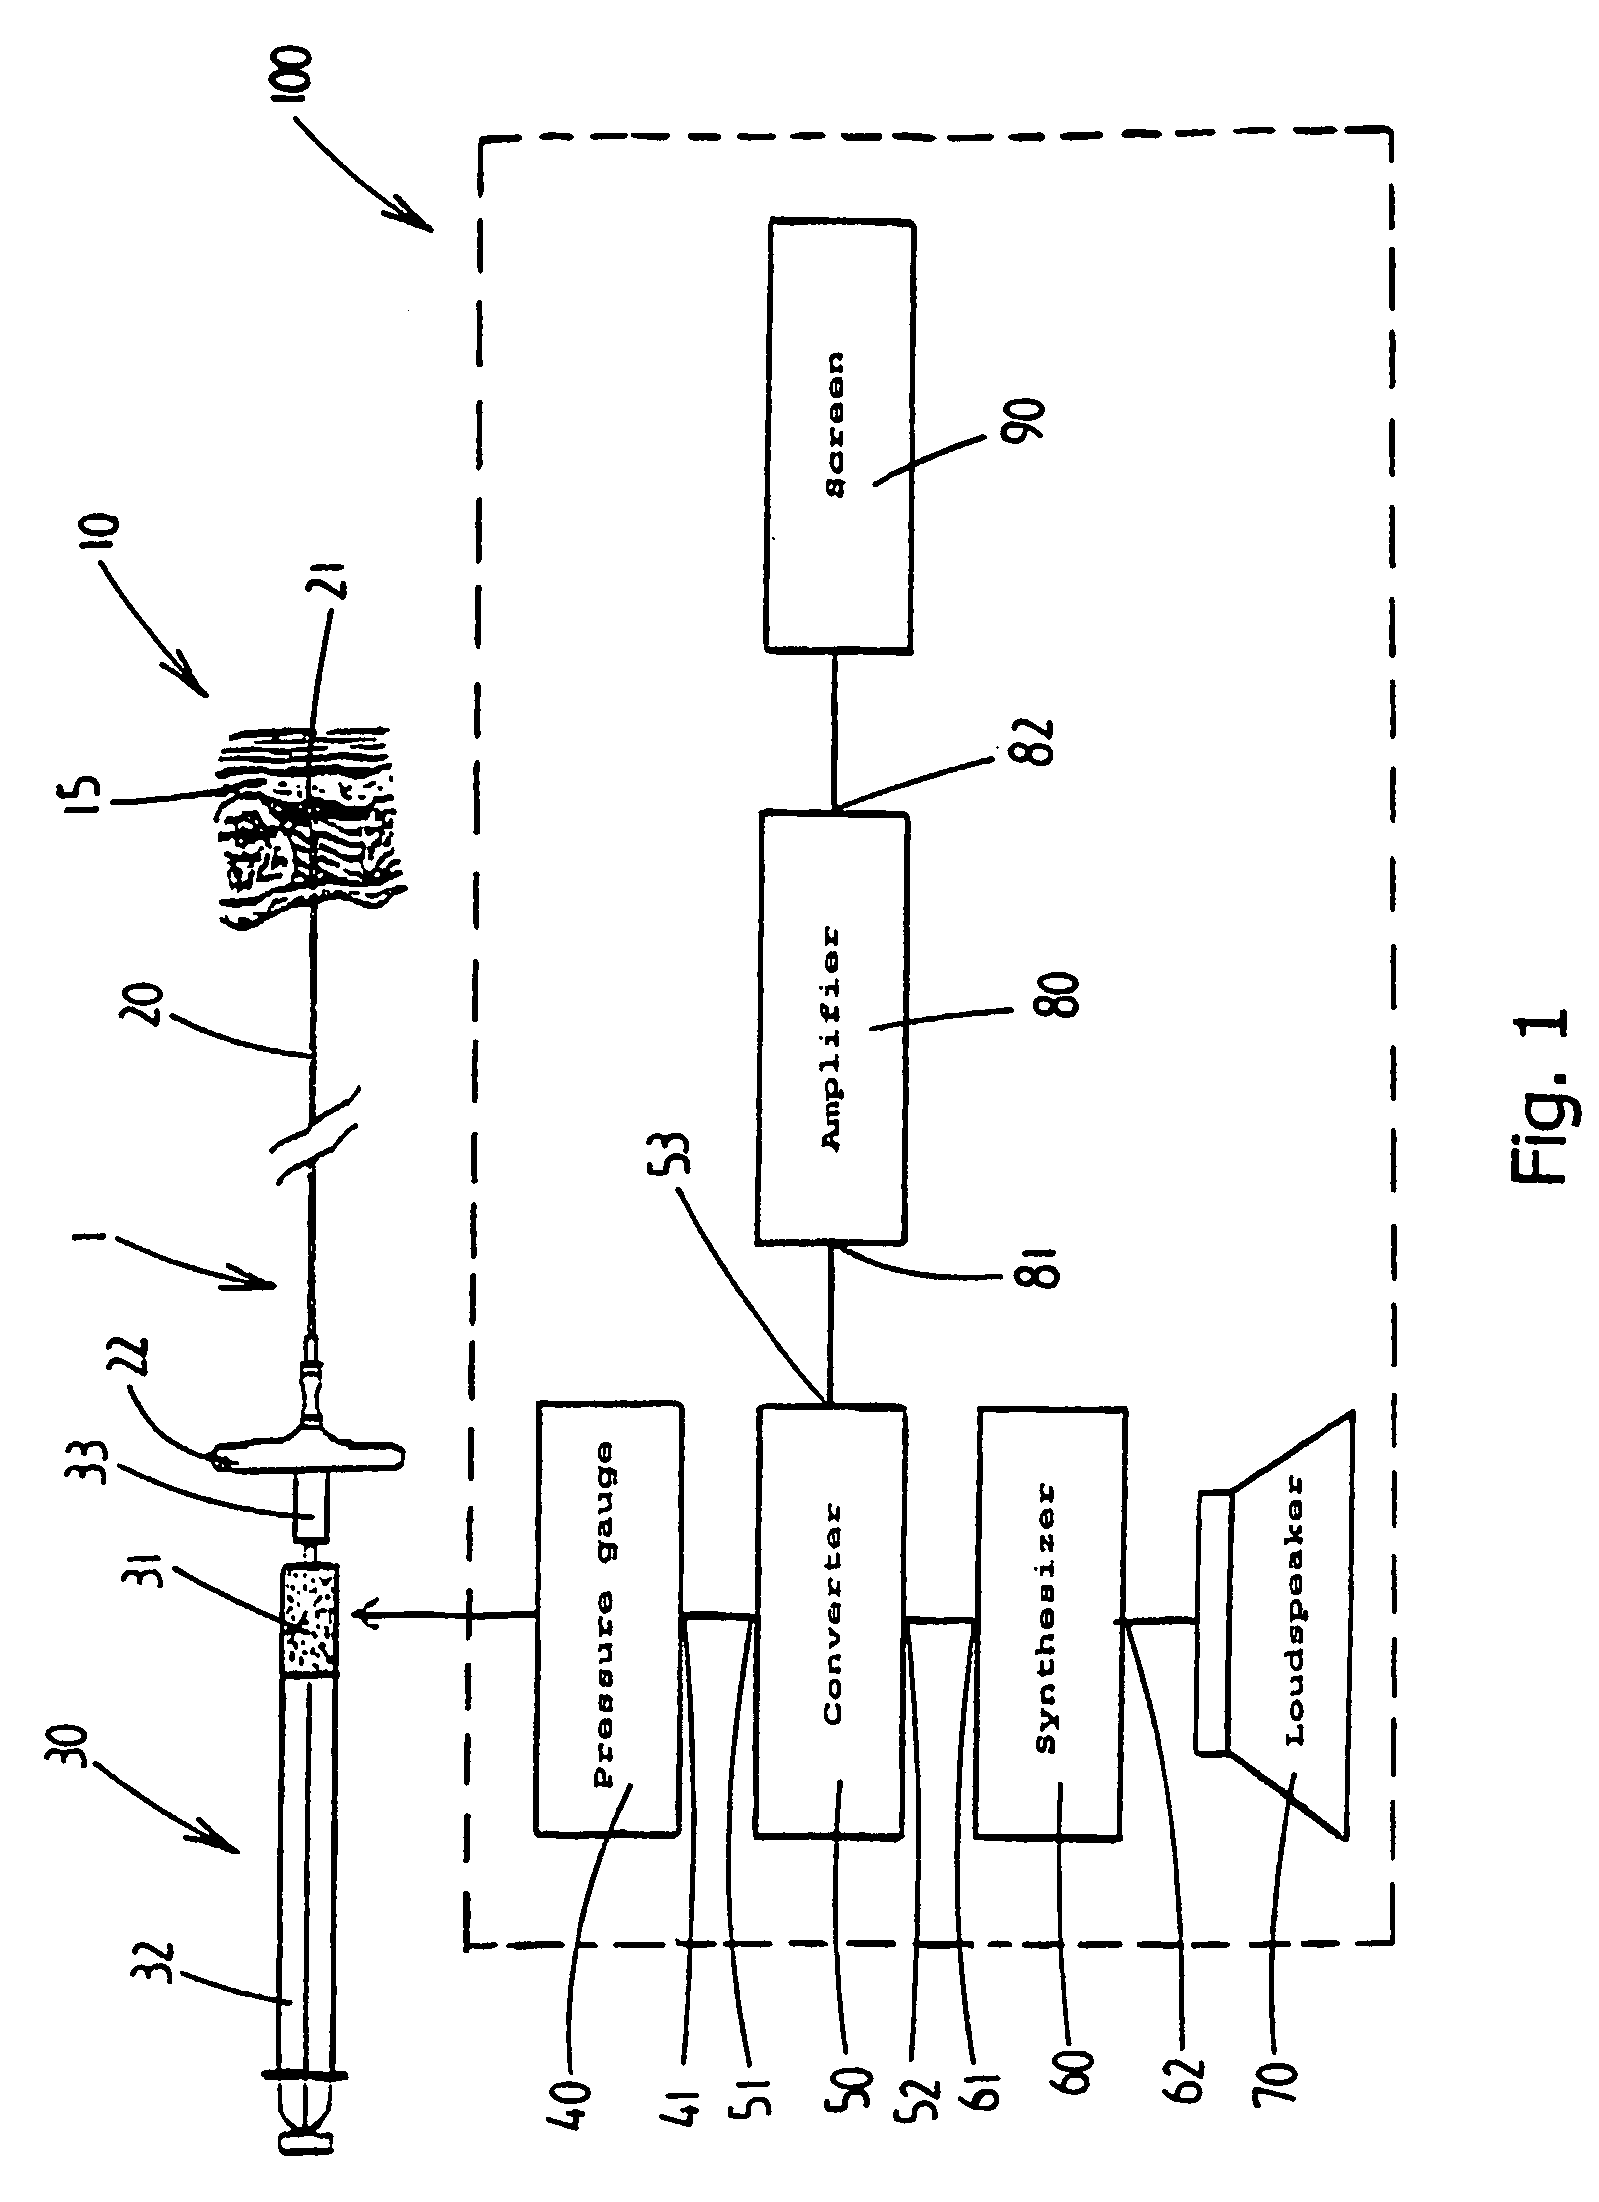 Device and method for locating anatomical cavity in a body